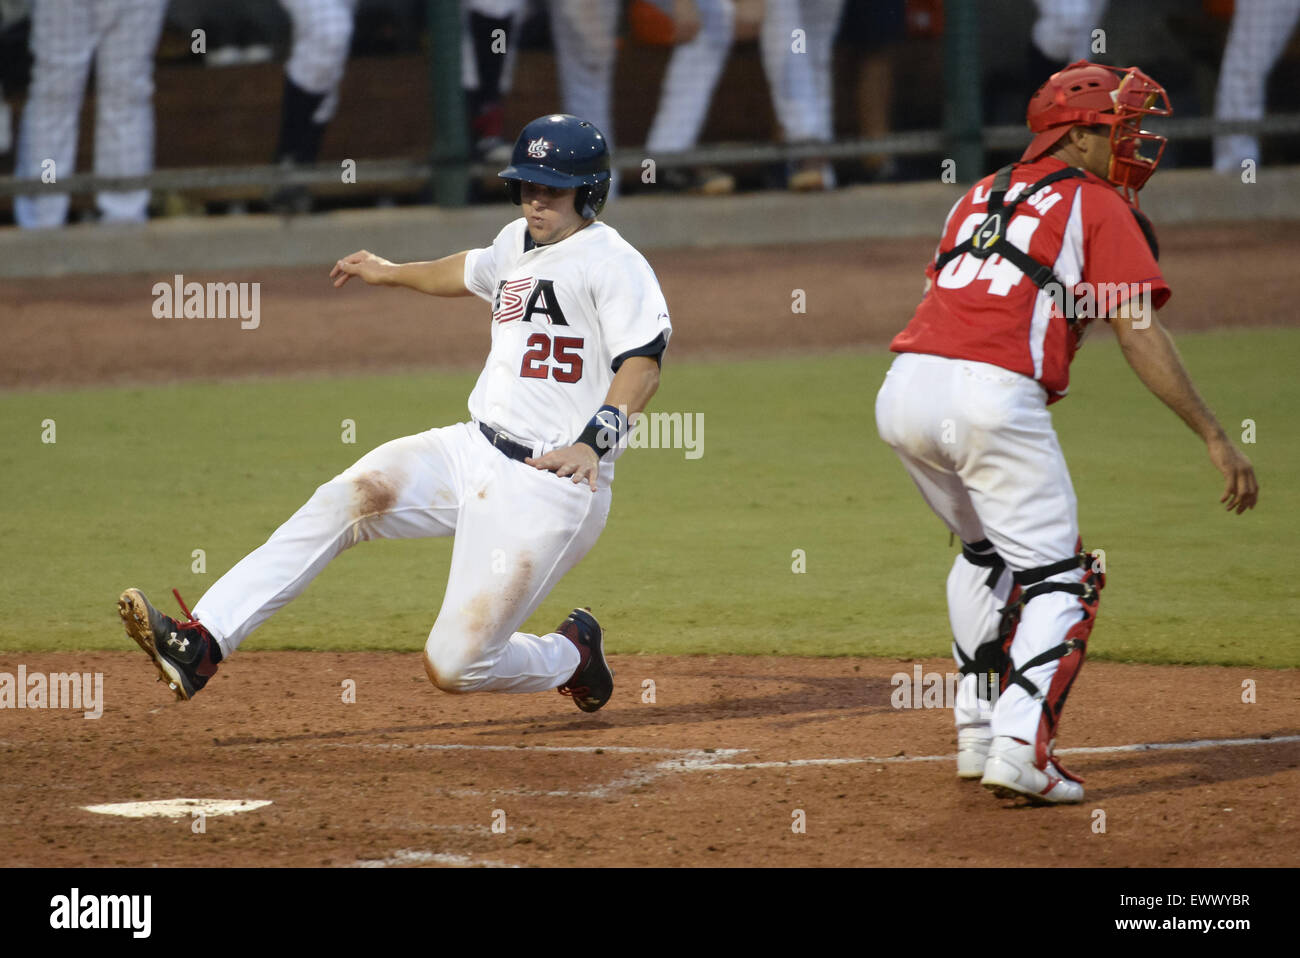 Cary, North Carolina, USA. 1st July, 2015. Chris Okey (25) of USA slides to home base against catcher Yulexis La Rosa, right, of Cuba to score the first point for the USA during the 6-th inning of game 1 of the USA Collegiate National Team versus Cuba National Team series played in Cary, N.C. on Wednesday, July 1, 2015. USA won 2-0. © Fabian Radulescu/ZUMA Wire/ZUMAPRESS.com/Alamy Live News Stock Photo